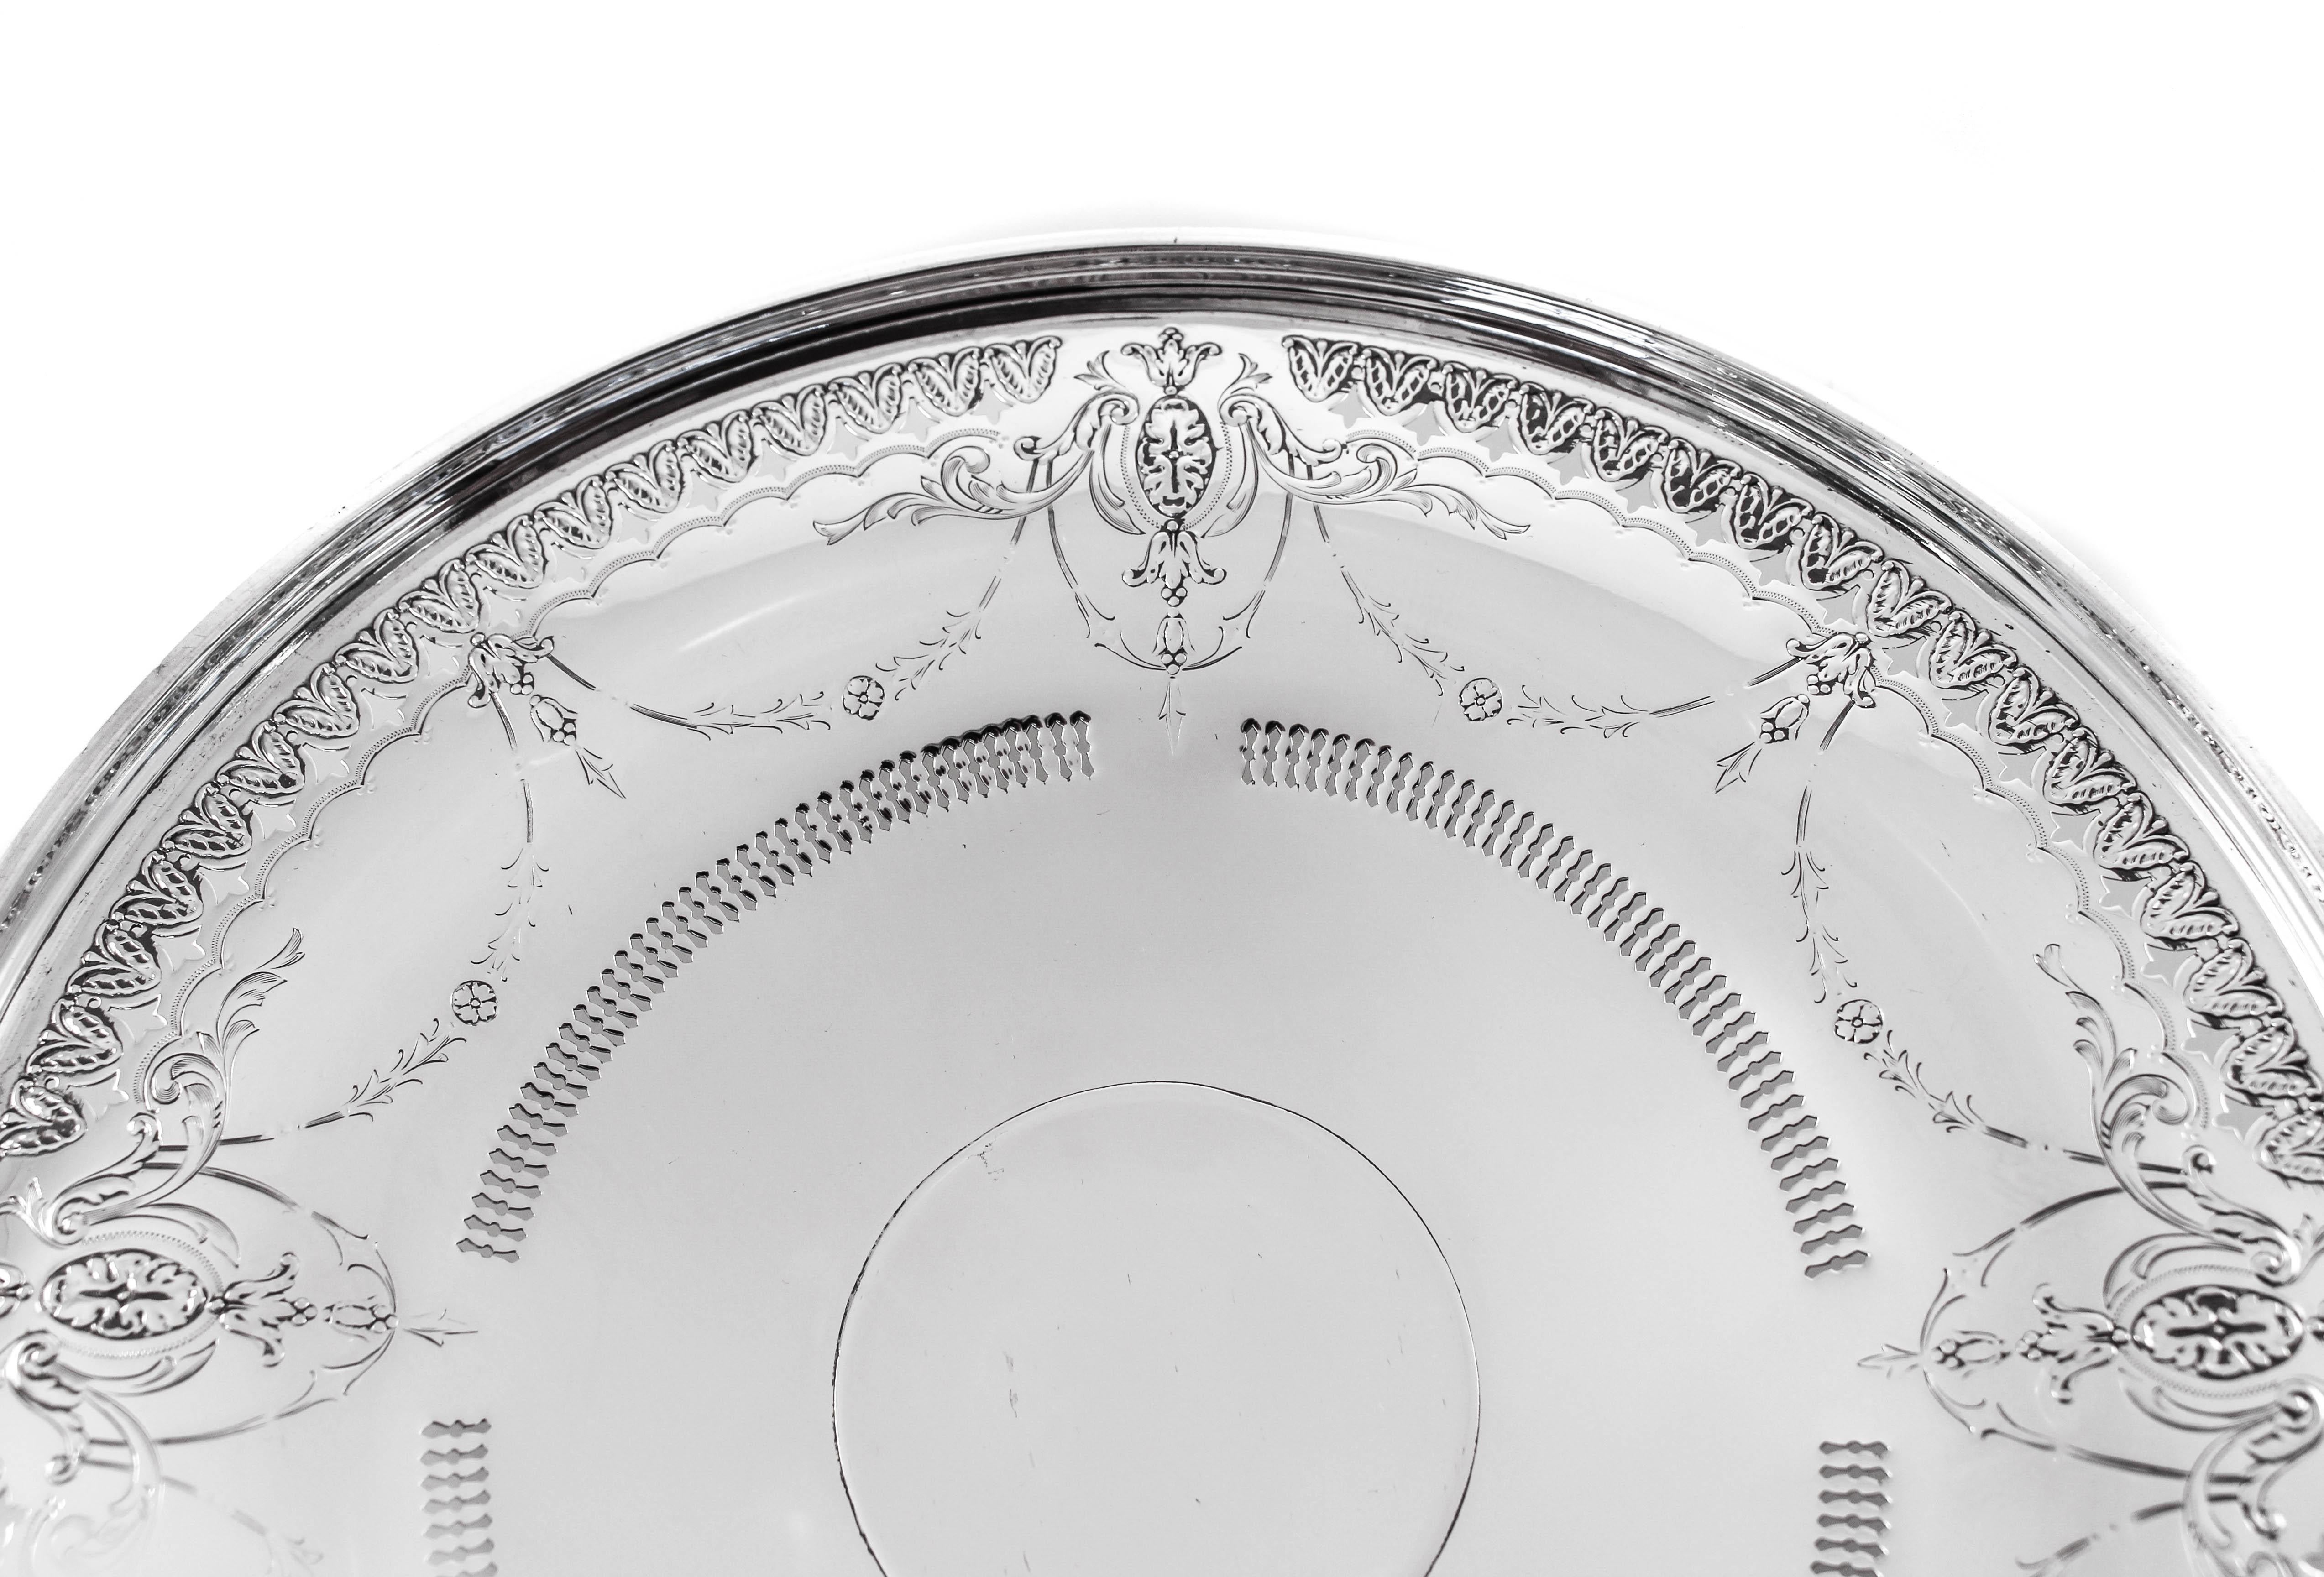 Old world elegance is yours for the taking in this beautiful sterling silver cake plate. Standing on a pedestal the rim has a slight lip to hold whatever is inside. Around the edge a cutout pattern with fleur de lis decorates the entire